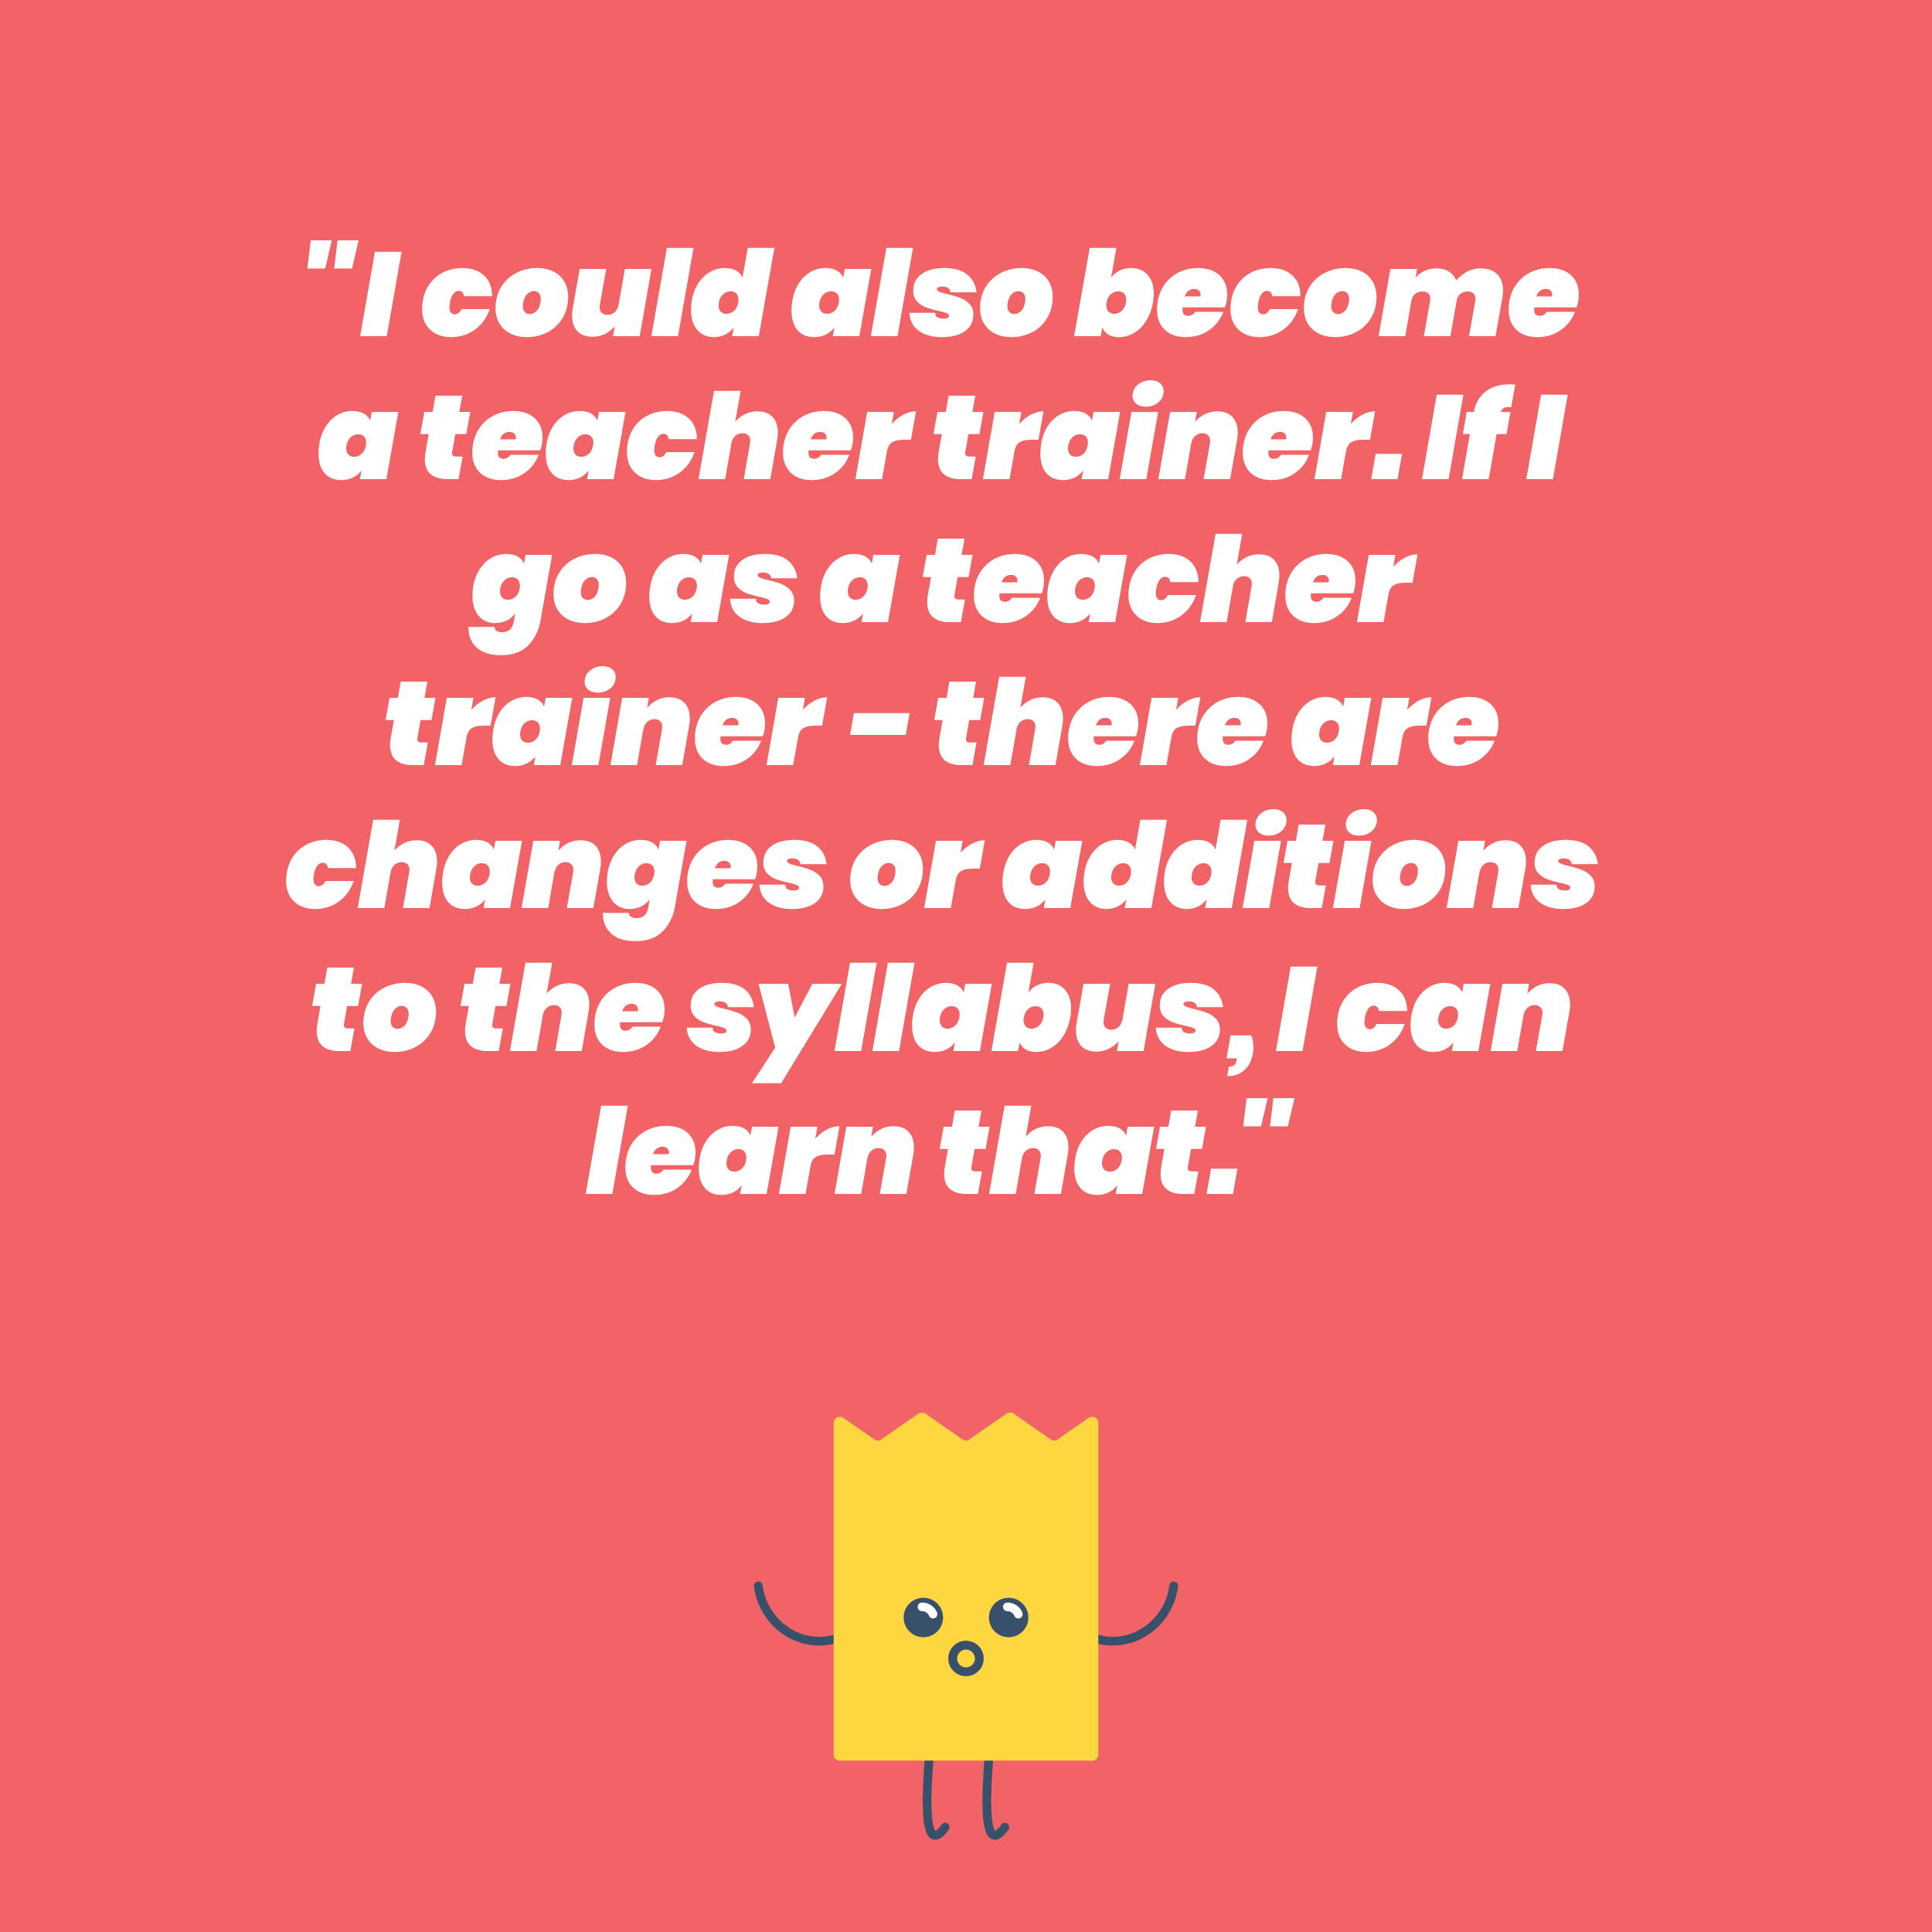 I could also become a teacher trainer. If I go as a teacher trainer - there are changes or additions to the syllabus, I can learn that